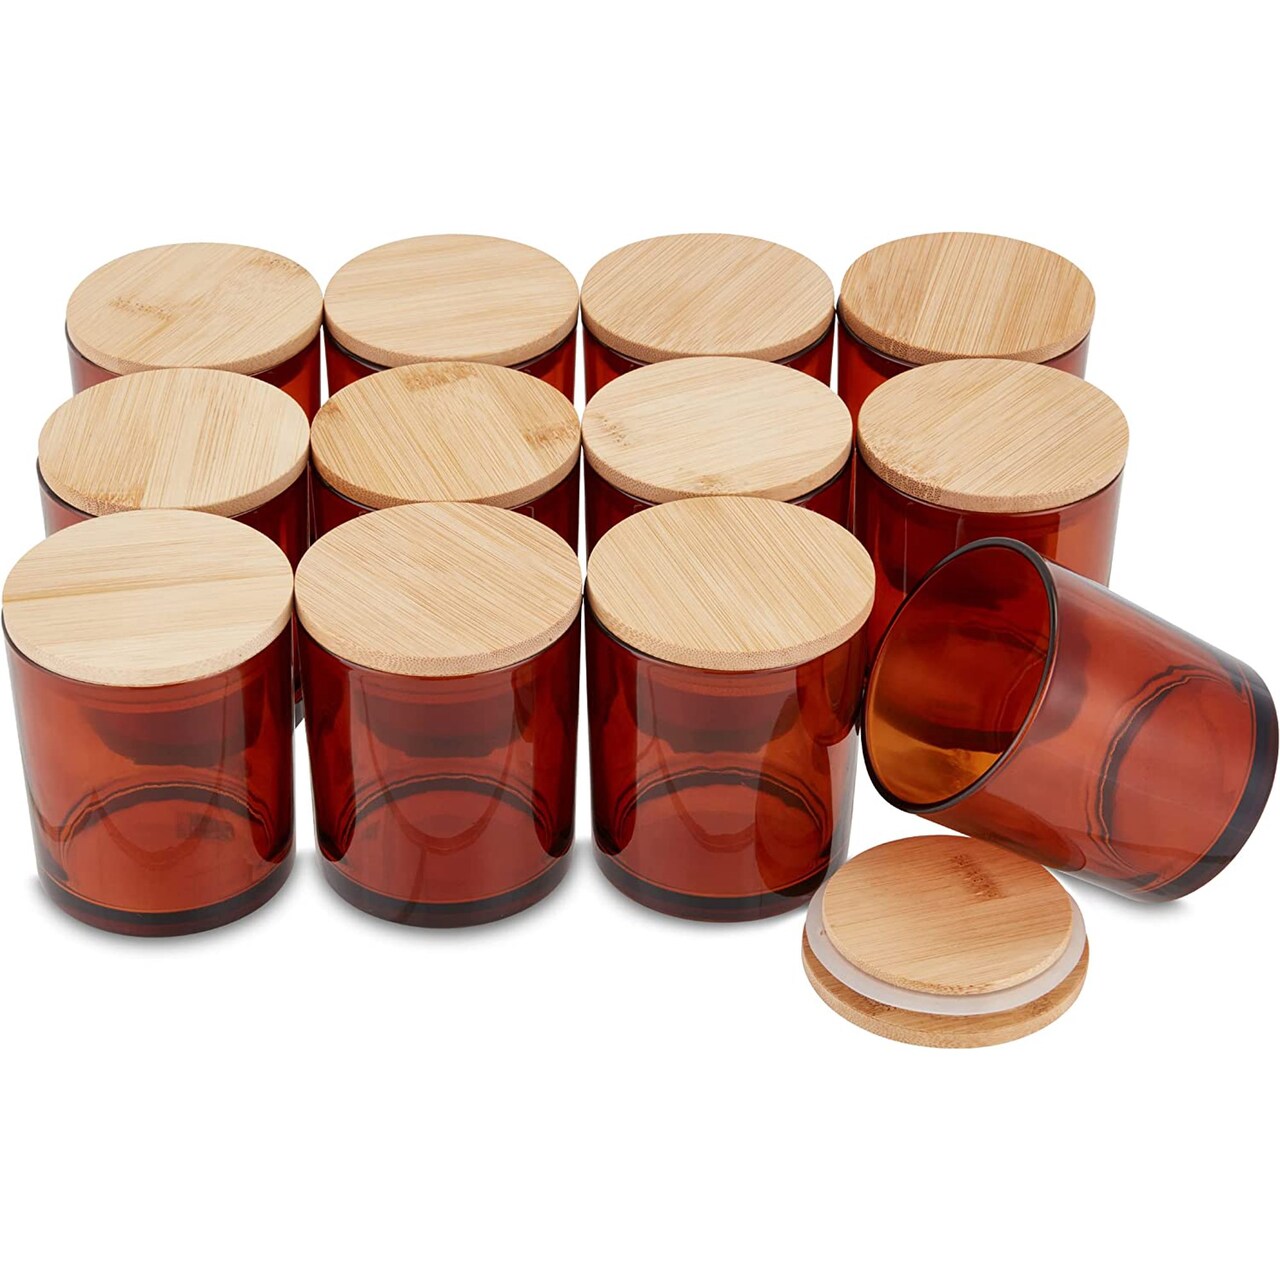 Pavelle 10 oz. Clear Glass Candle Jars w/Bamboo Lids for Candle Making